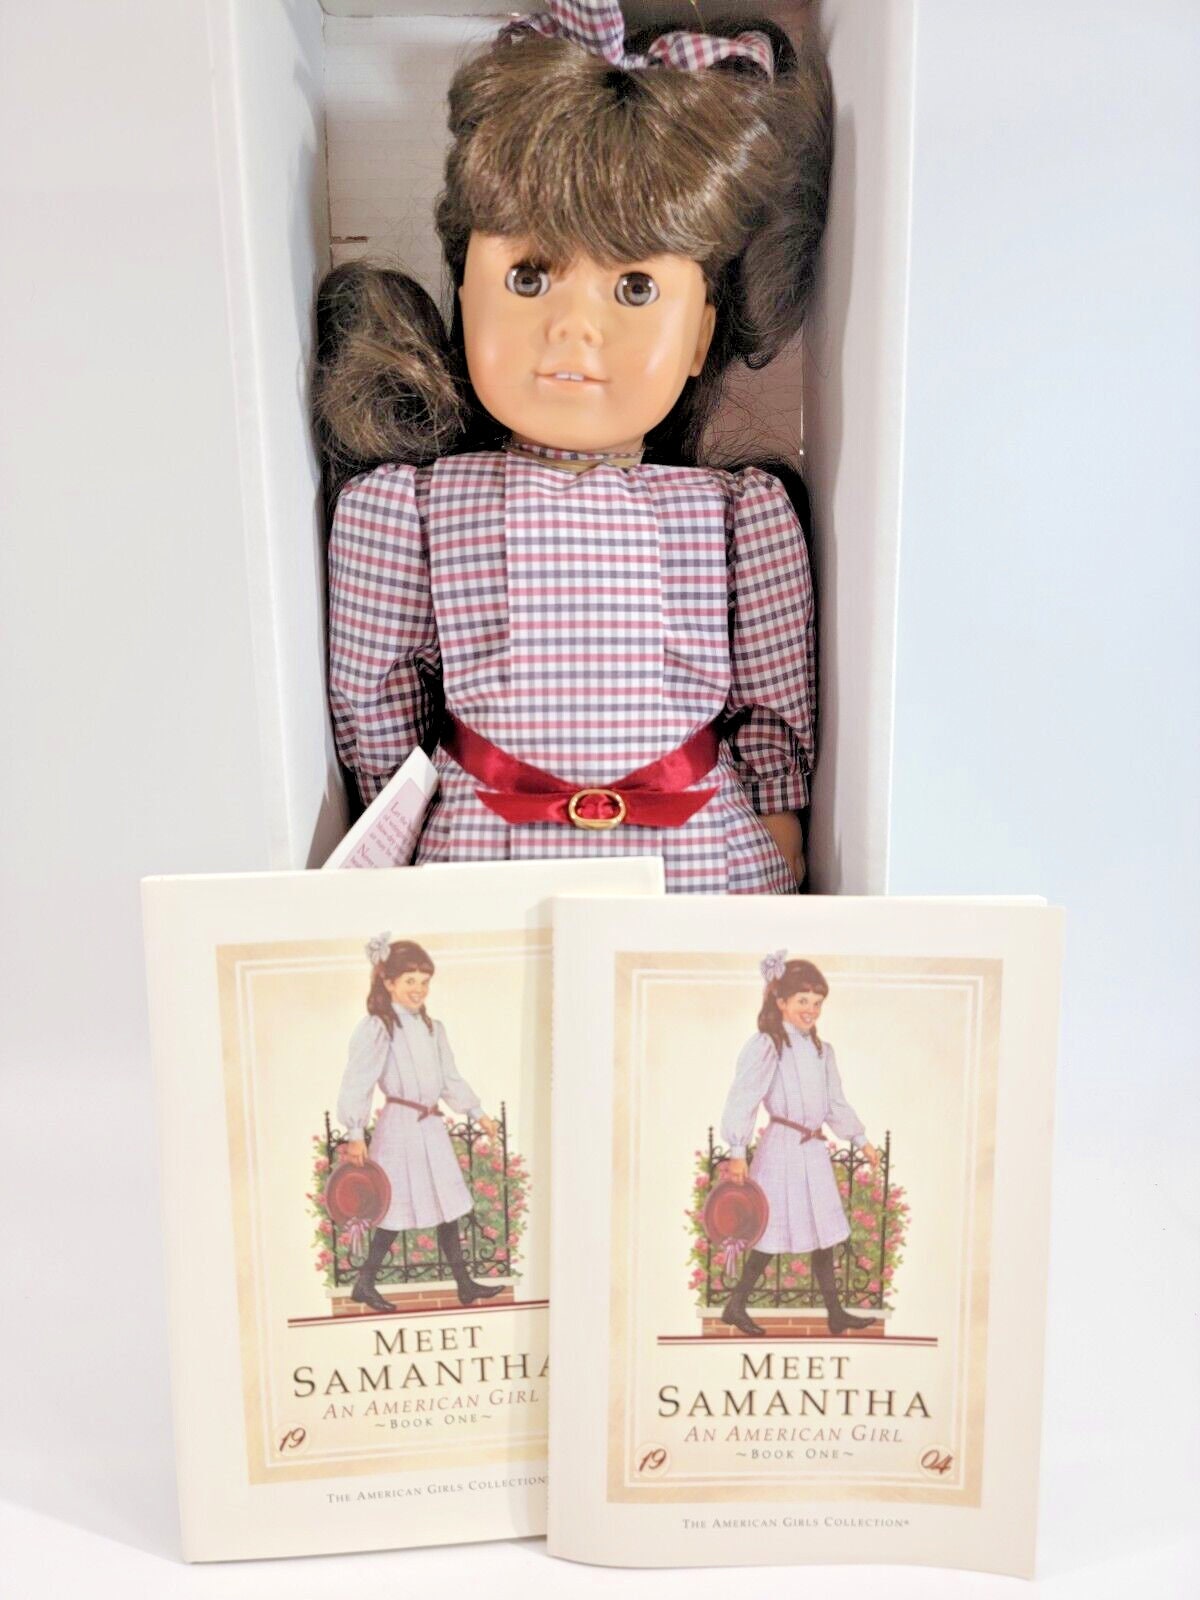 Syndees Crafts Vintage Dolls Doll Hair Soft Bodied Dolls Brown Eyed Girl  Doll Brown Hair Vintage Toys and Doll Making 